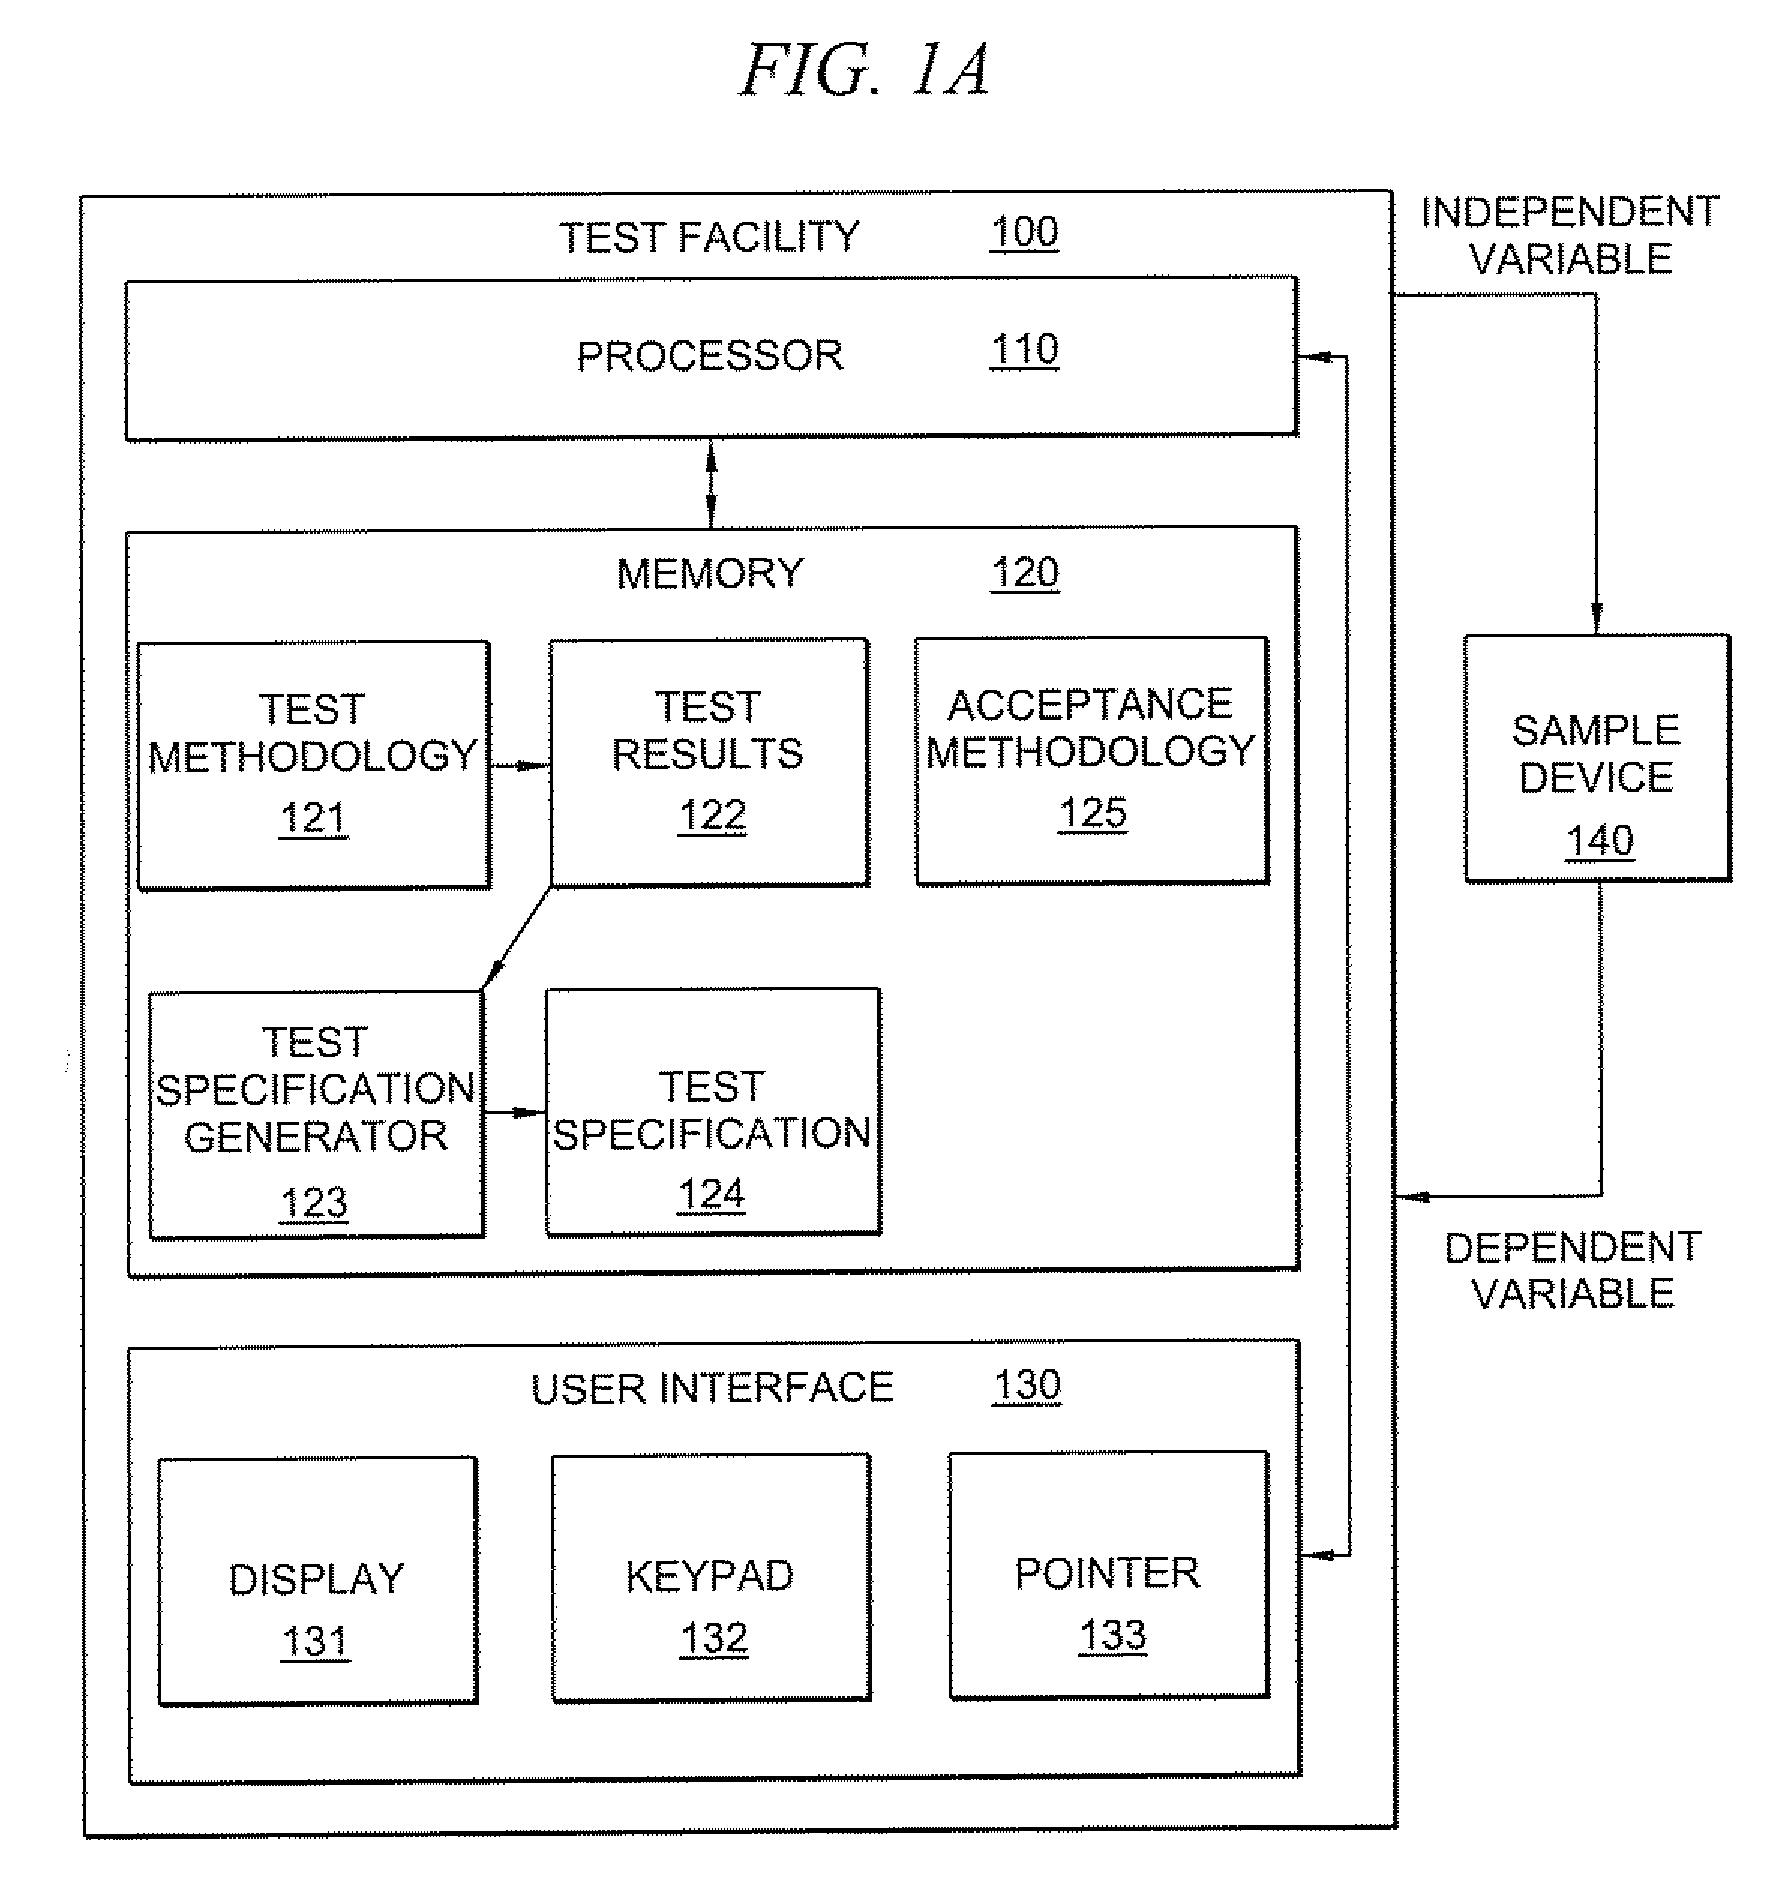 Generation of test specifications based on measured data points